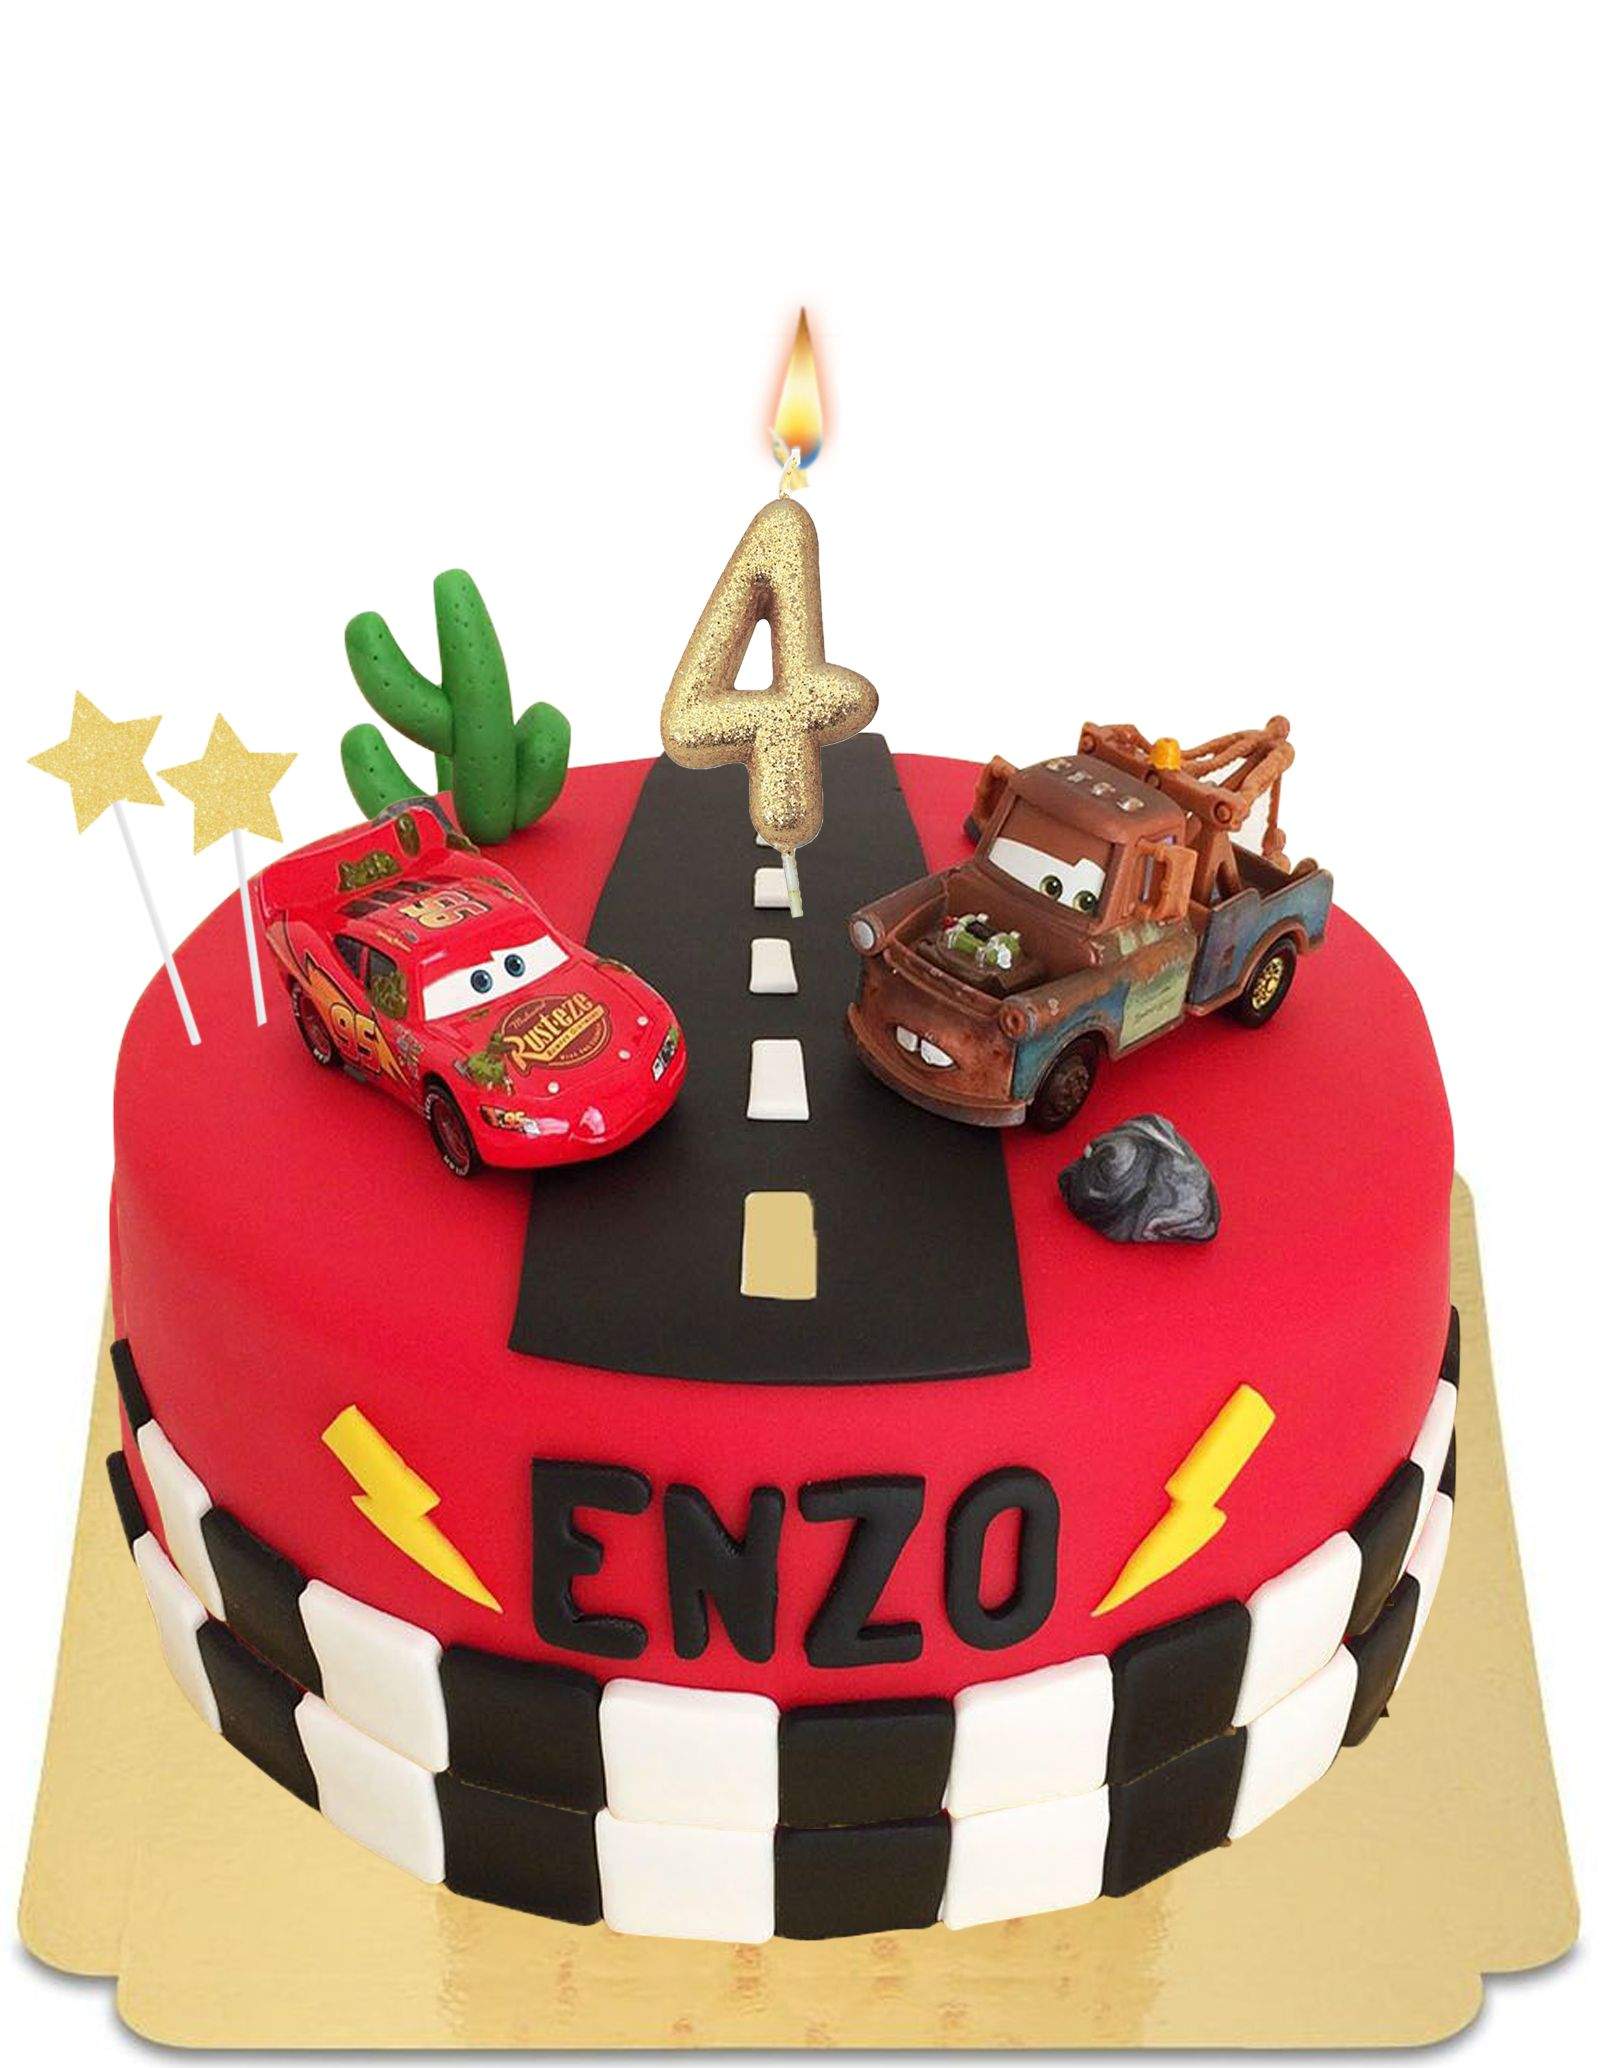 Contactless Birthday Cake Delivery in Gurgaon | Gurgaon Bakers